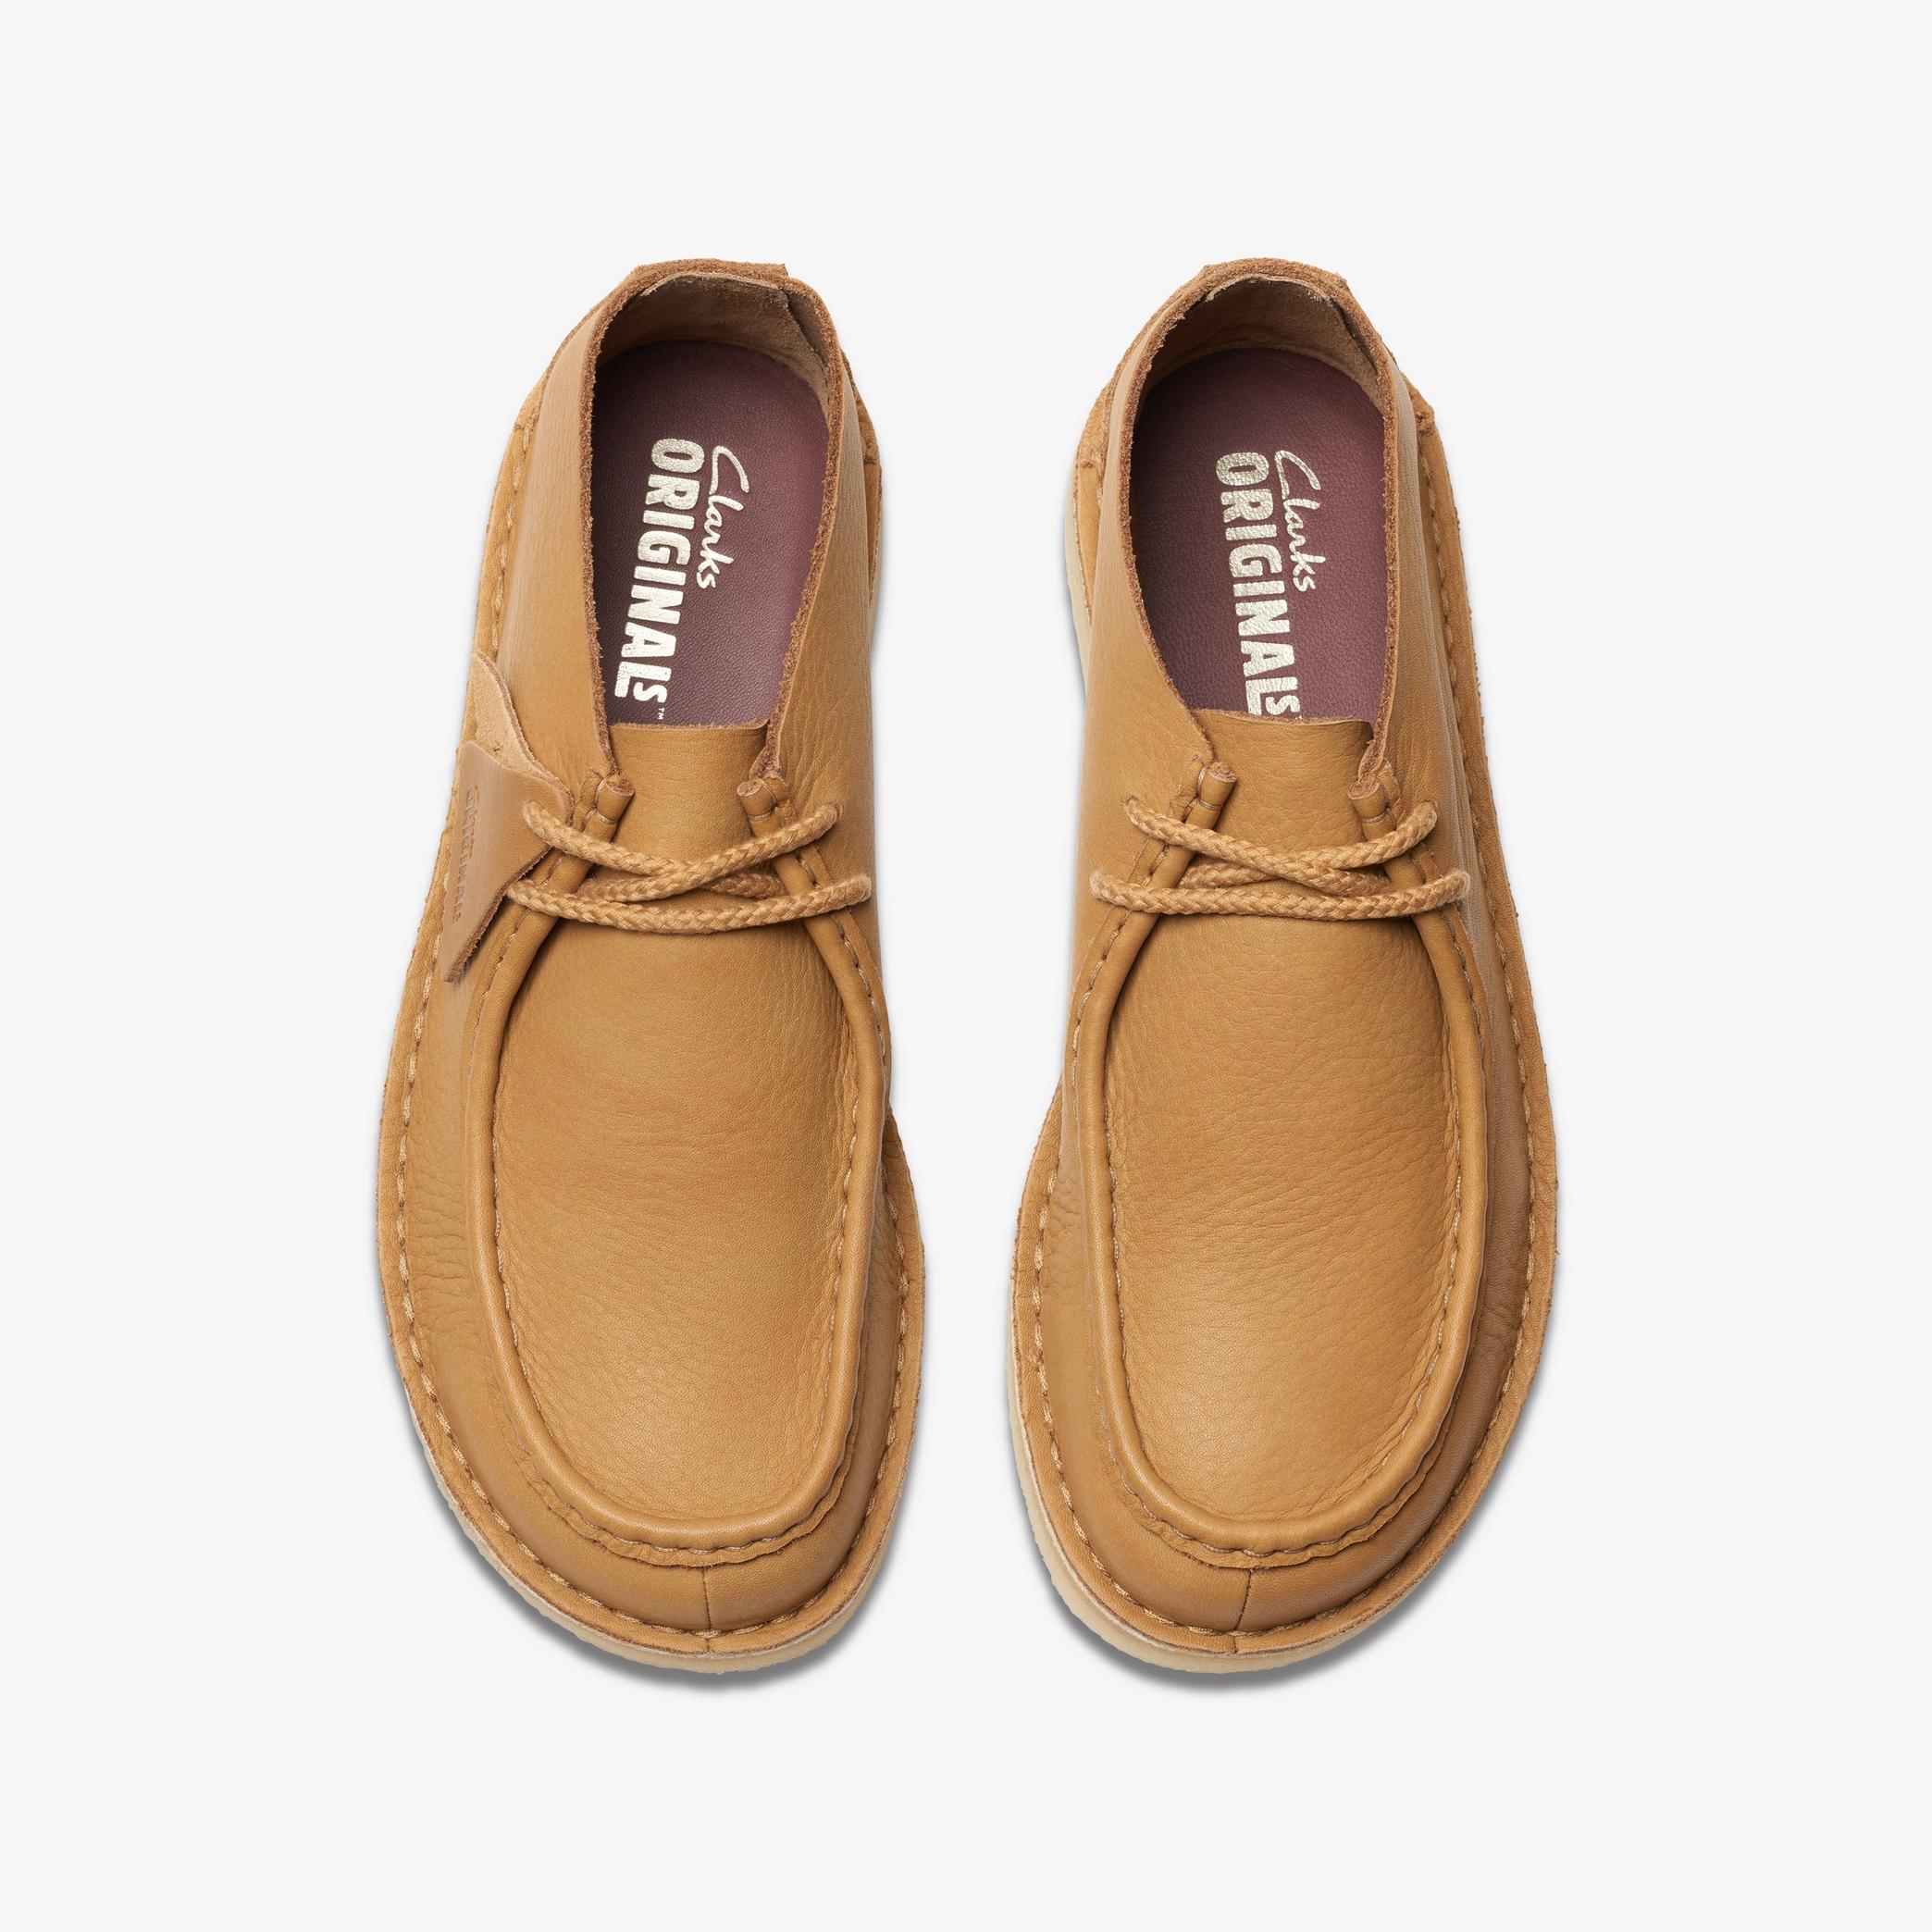 Desert Nomad Mid Tan Leather Moccasins, view 6 of 6